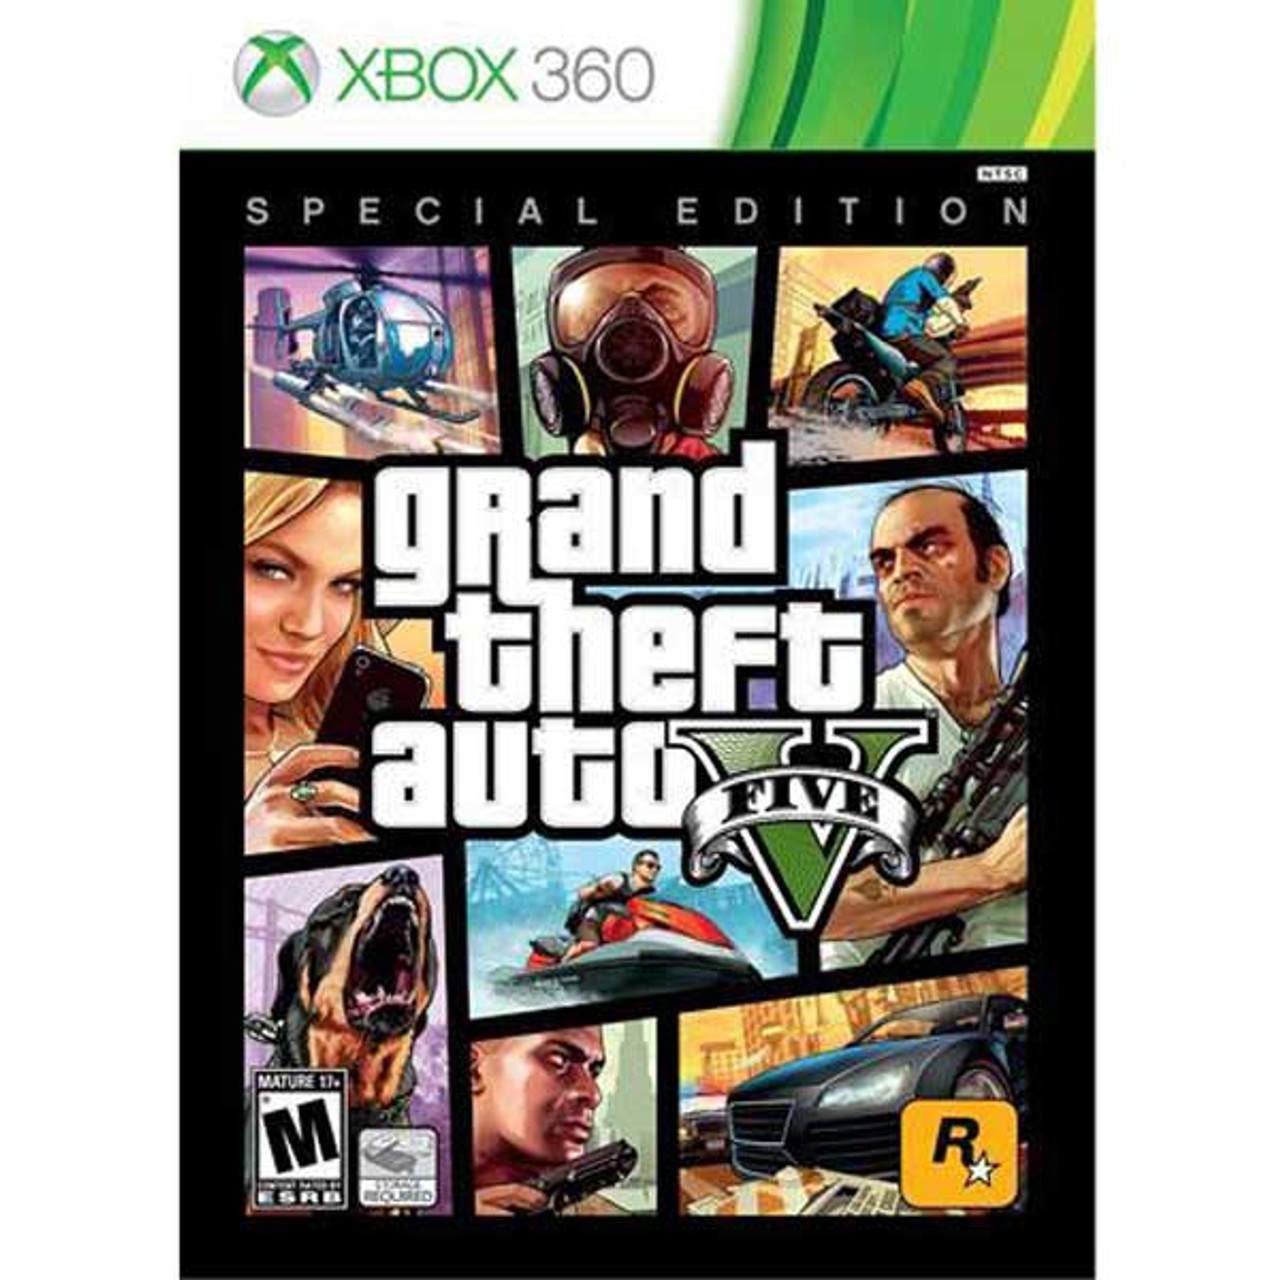 Grand Theft Auto V Xbox 360 GTA 5 Disc 2 Play Only Tested